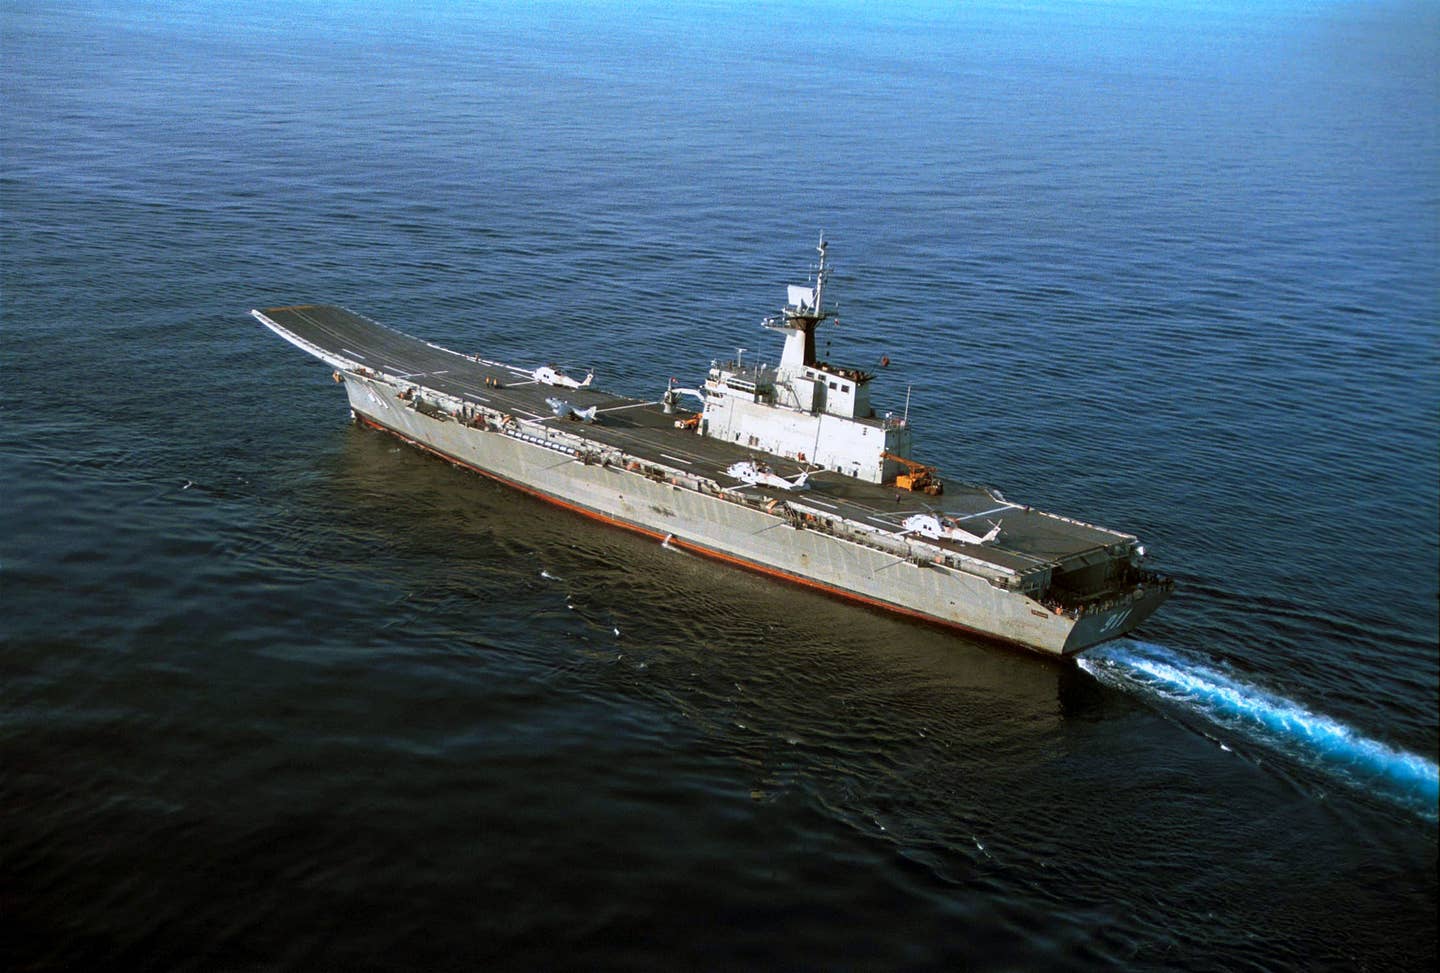 HTMS <em>Chakri Naruebet</em> underway in the South China Sea in April 2001 with a single AV-8 and three S-70Bs on the deck. <em>U.S. Navy</em>